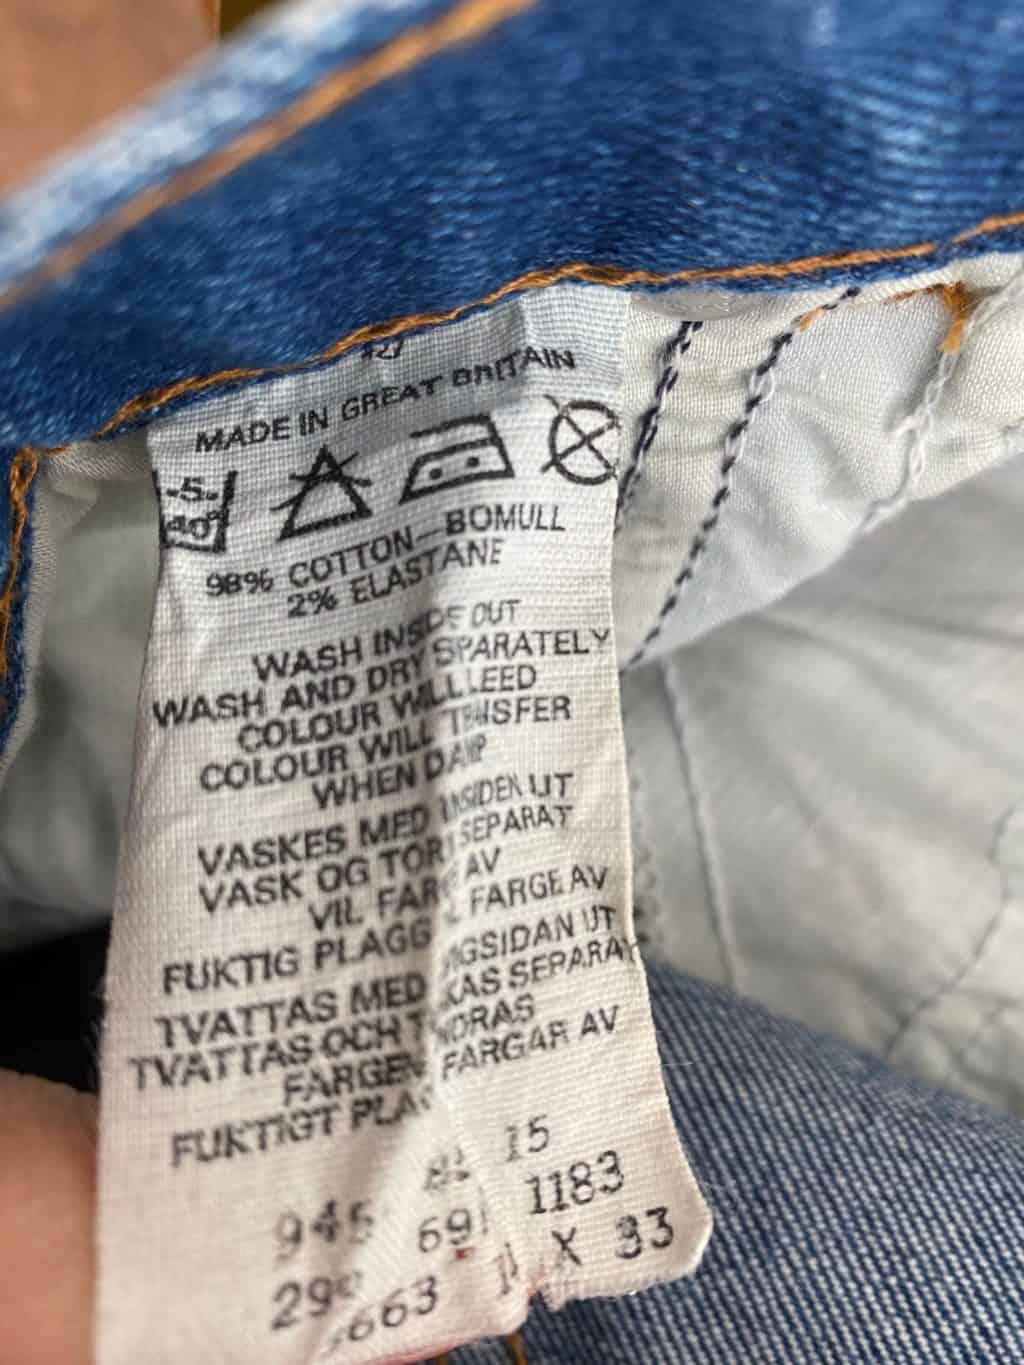 LEVIS 1970s Jeans 'Made in Great 